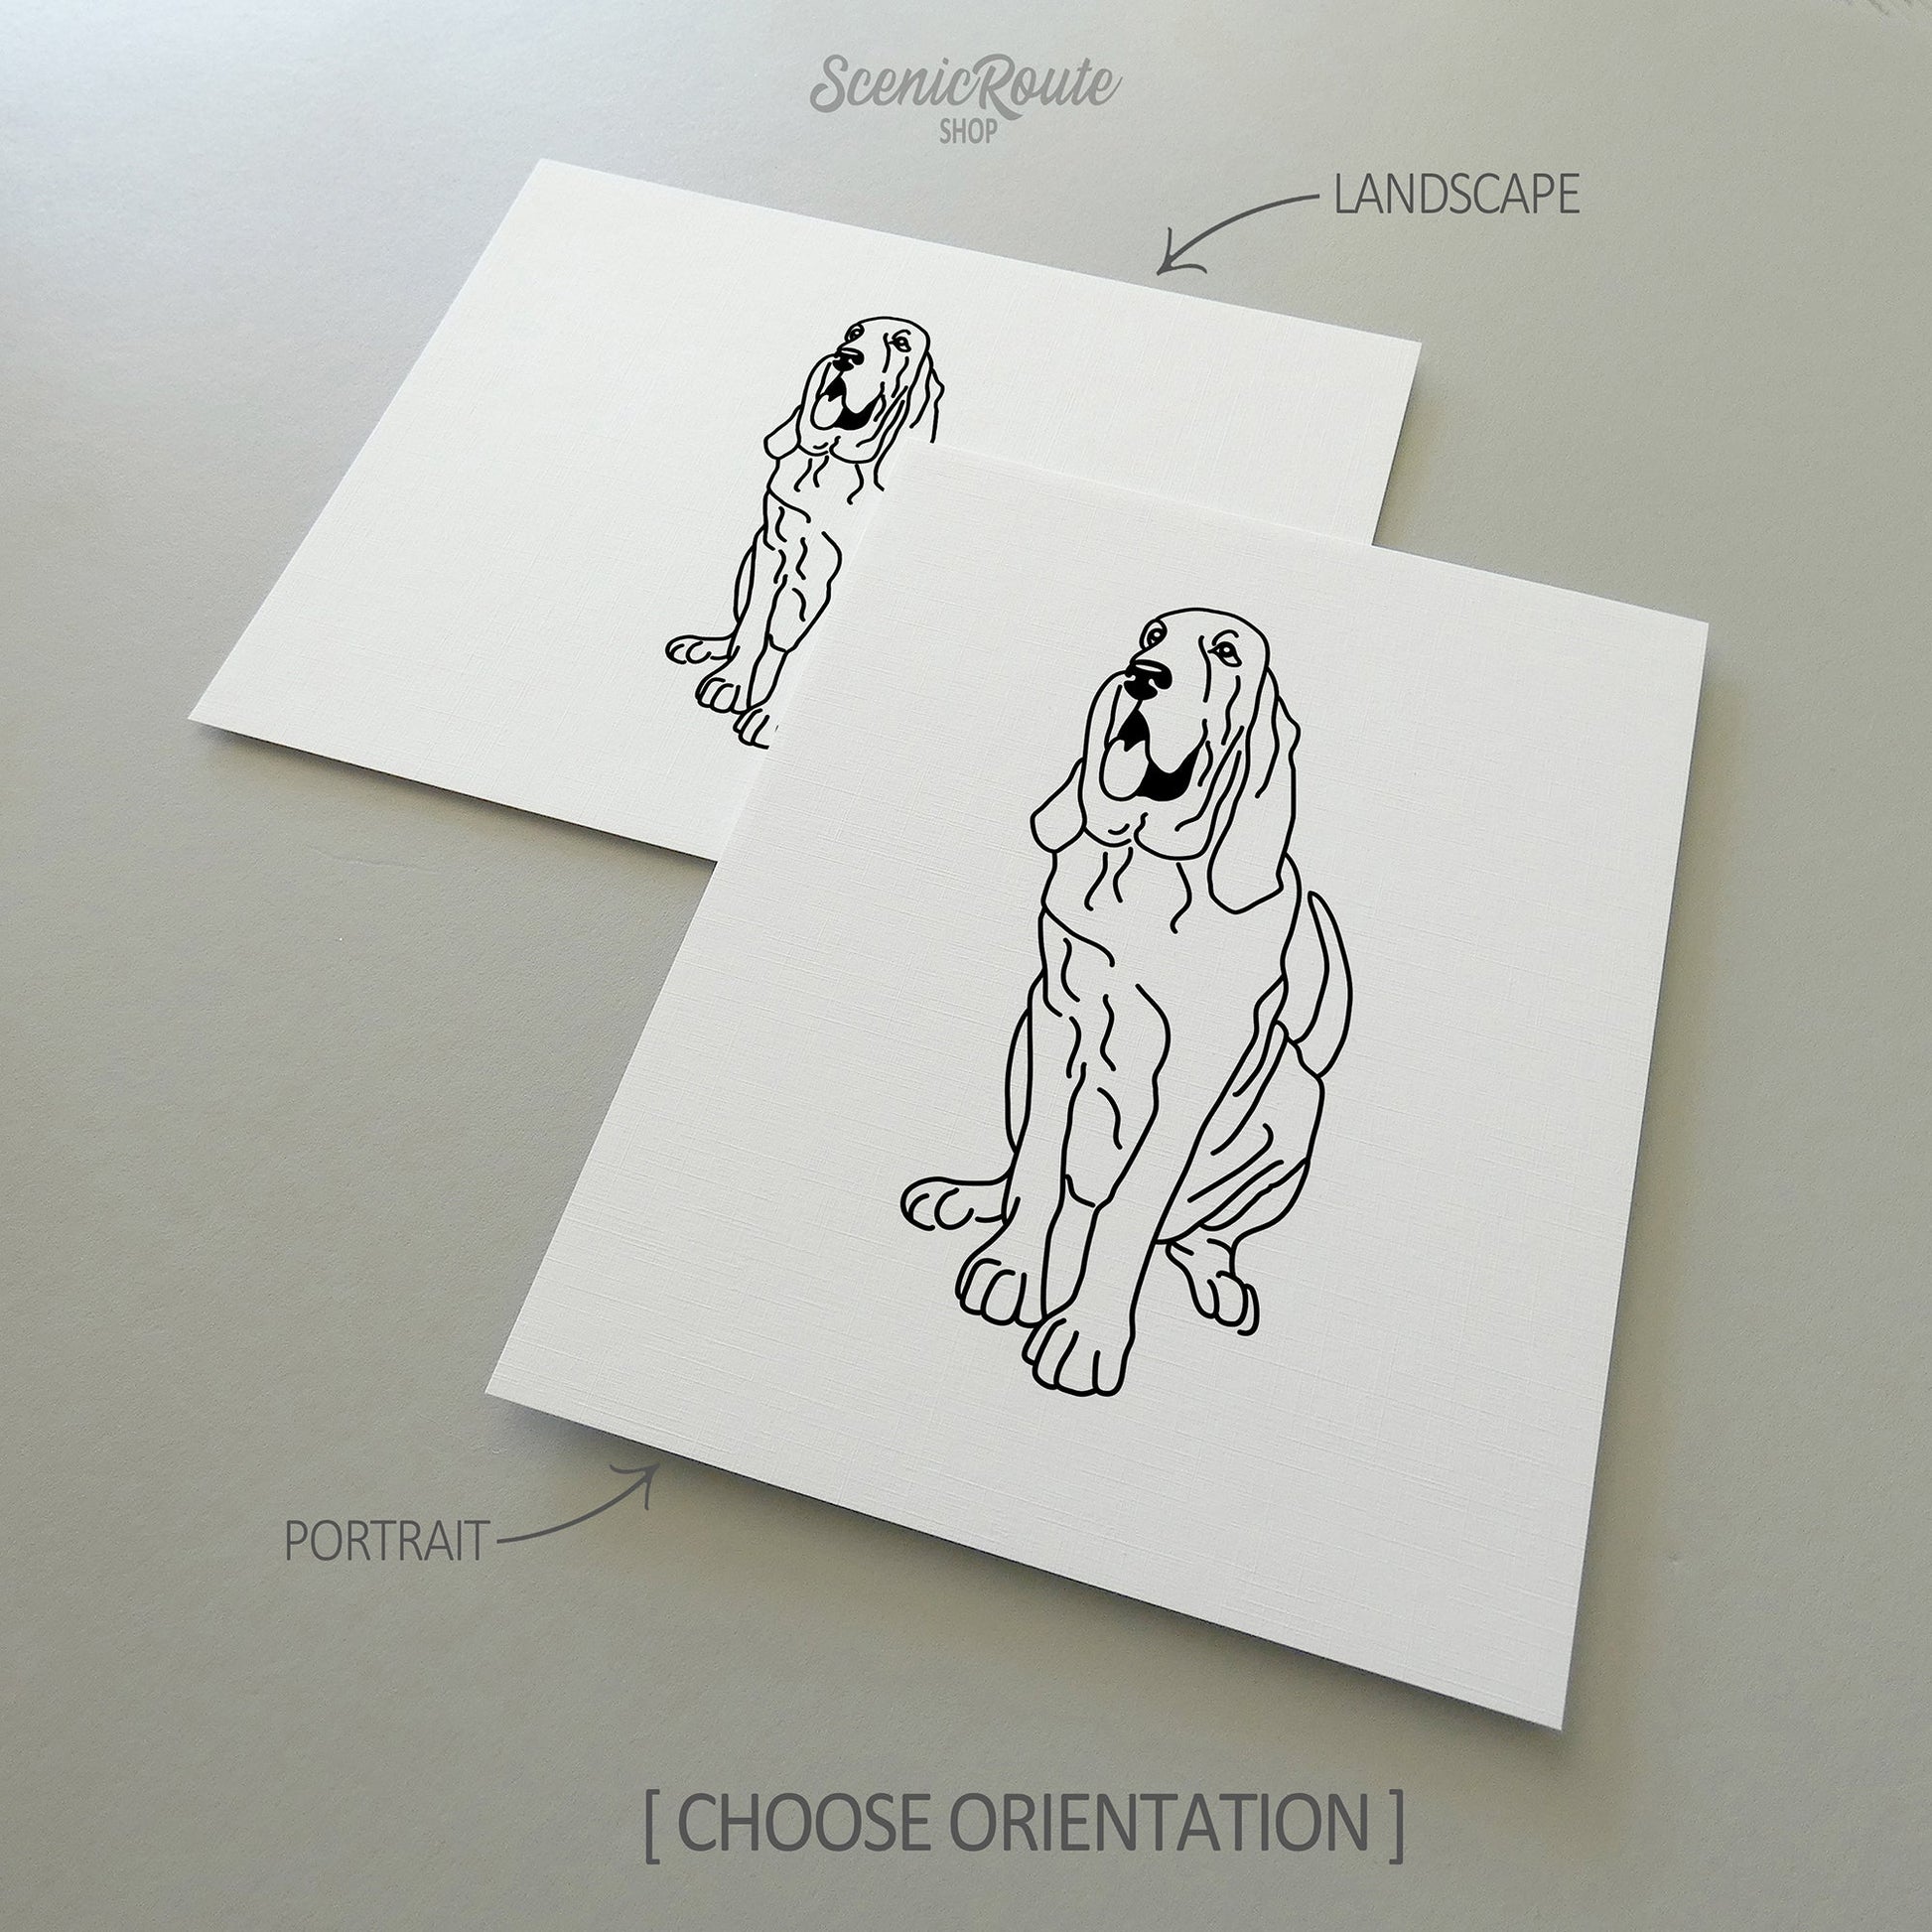 Two drawings of a Bloodhound dog on white linen paper with a gray background.  Pieces are shown in portrait and landscape orientation options to illustrate the available art print options.